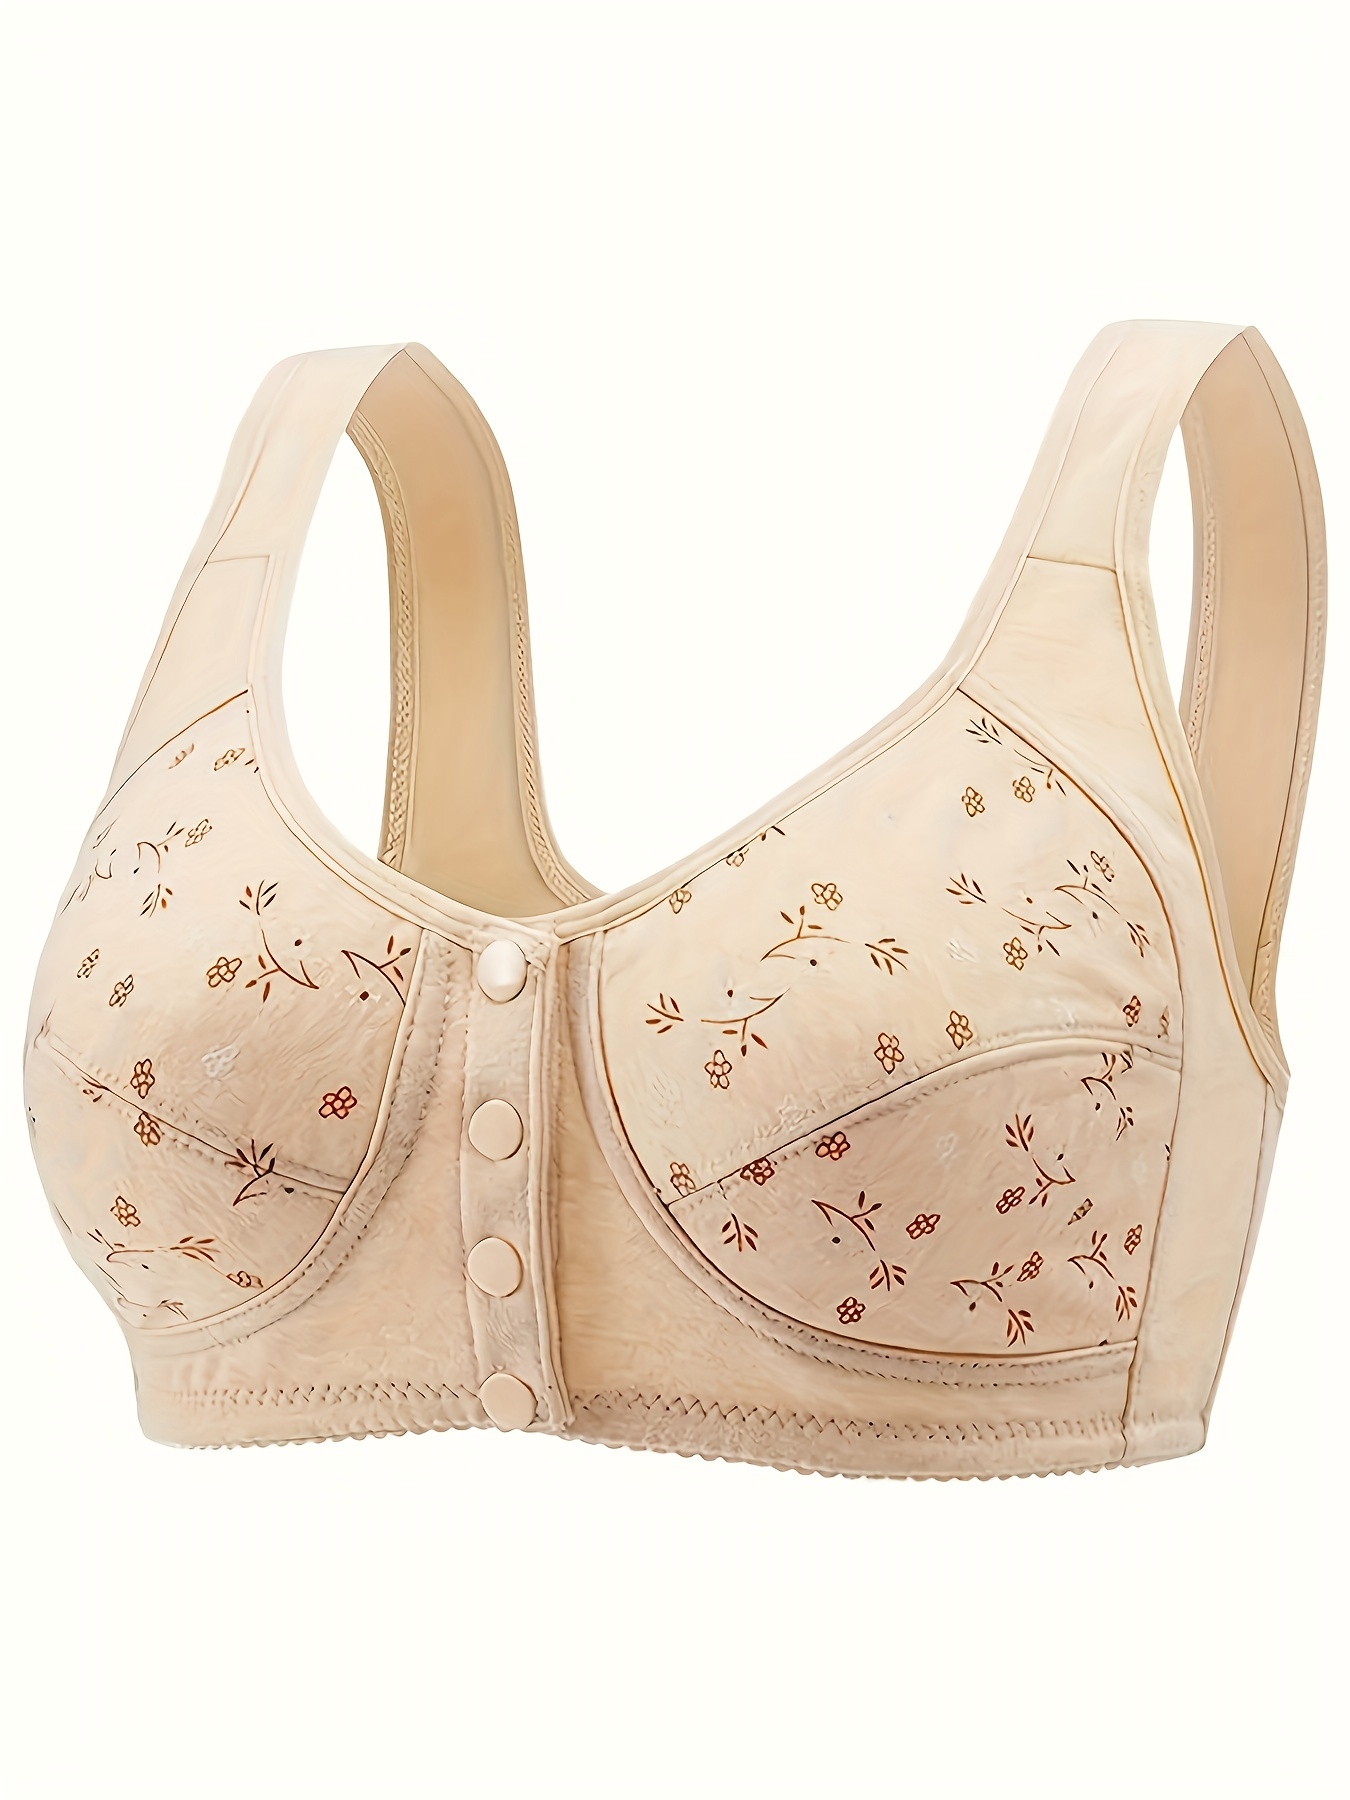 Daisy Bra for Women,Comfortable Convenient Front Snap Bra Casual